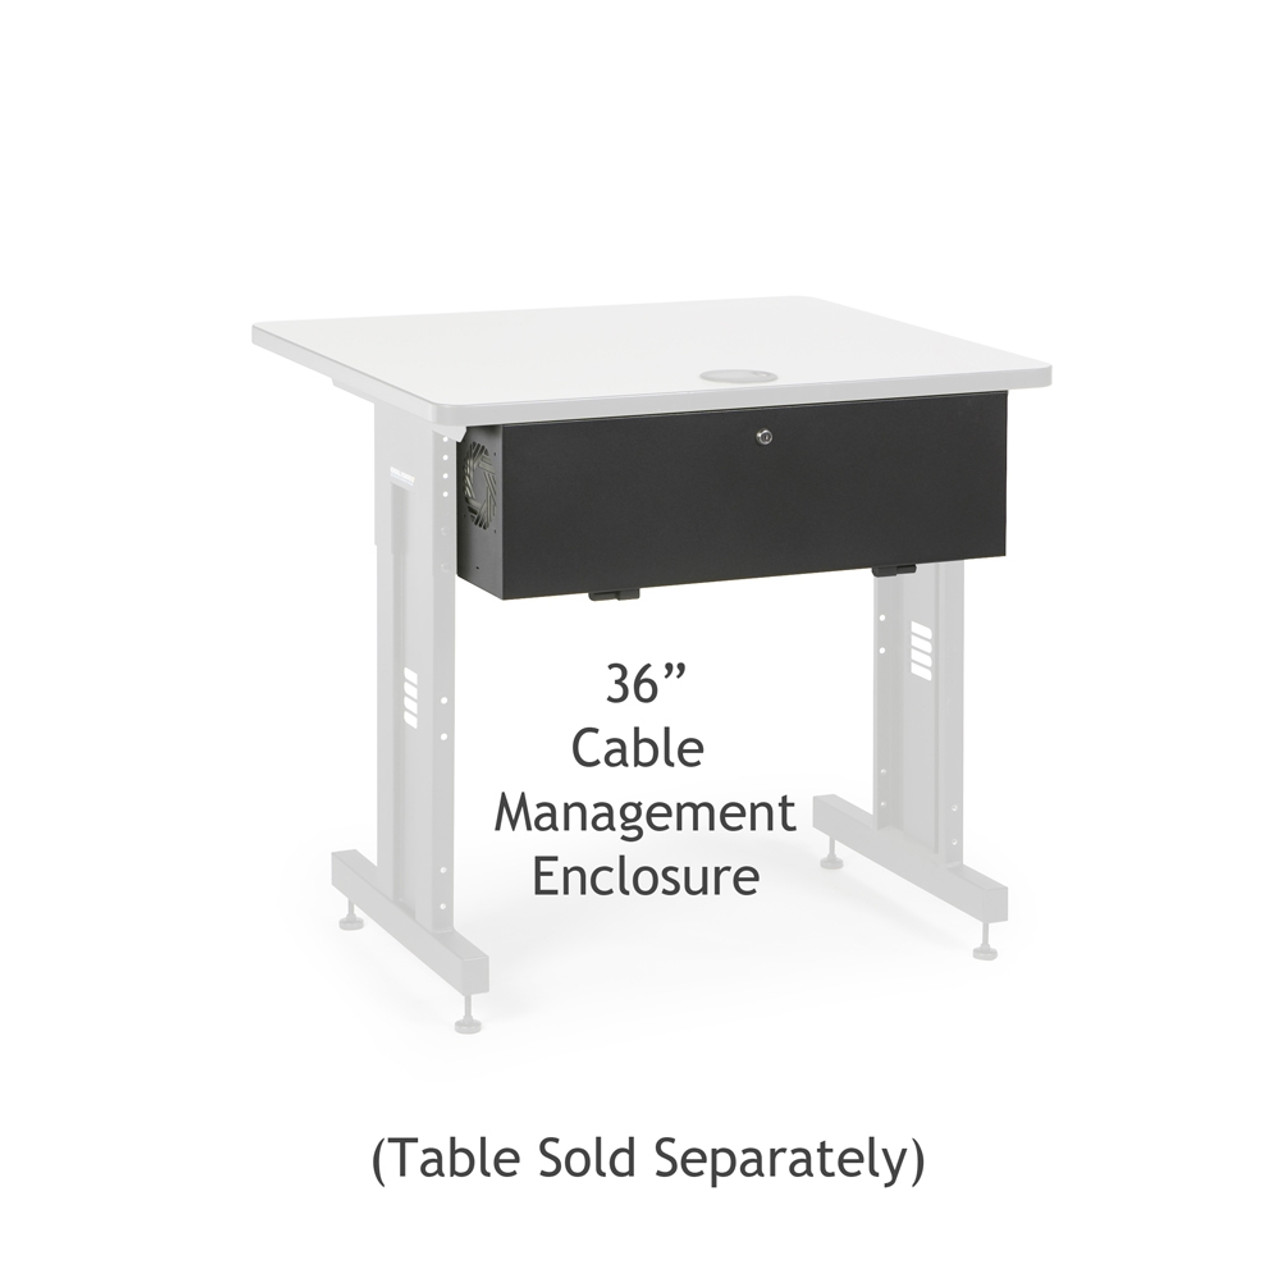 https://cdn11.bigcommerce.com/s-bfxxgrup/images/stencil/1280x1280/products/6278/31785/36-Inch-Training-Table-Cable-Management-Enclosure-Accessories__70561.1475162874.jpg?c=2